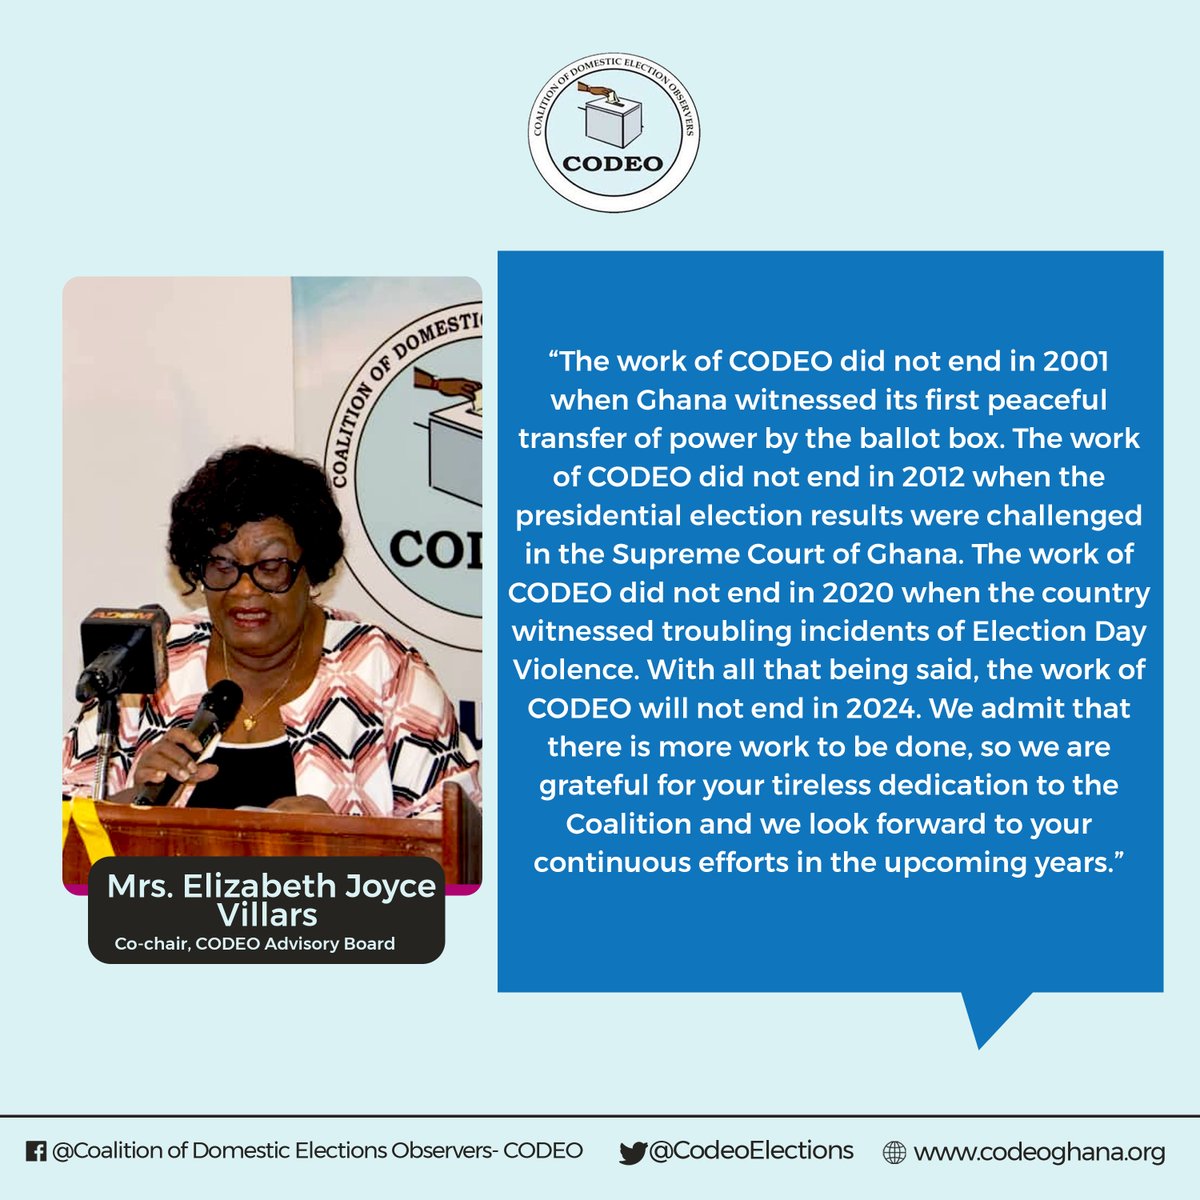 Amidst milestones and challenges, CODEO's mission remains unwavering. In her keynote address, Mrs. Elizabeth Joyce Villars emphasizes the need for stakeholders to persist in their continuous efforts, forging a path towards a brighter future of credible and peaceful elections.